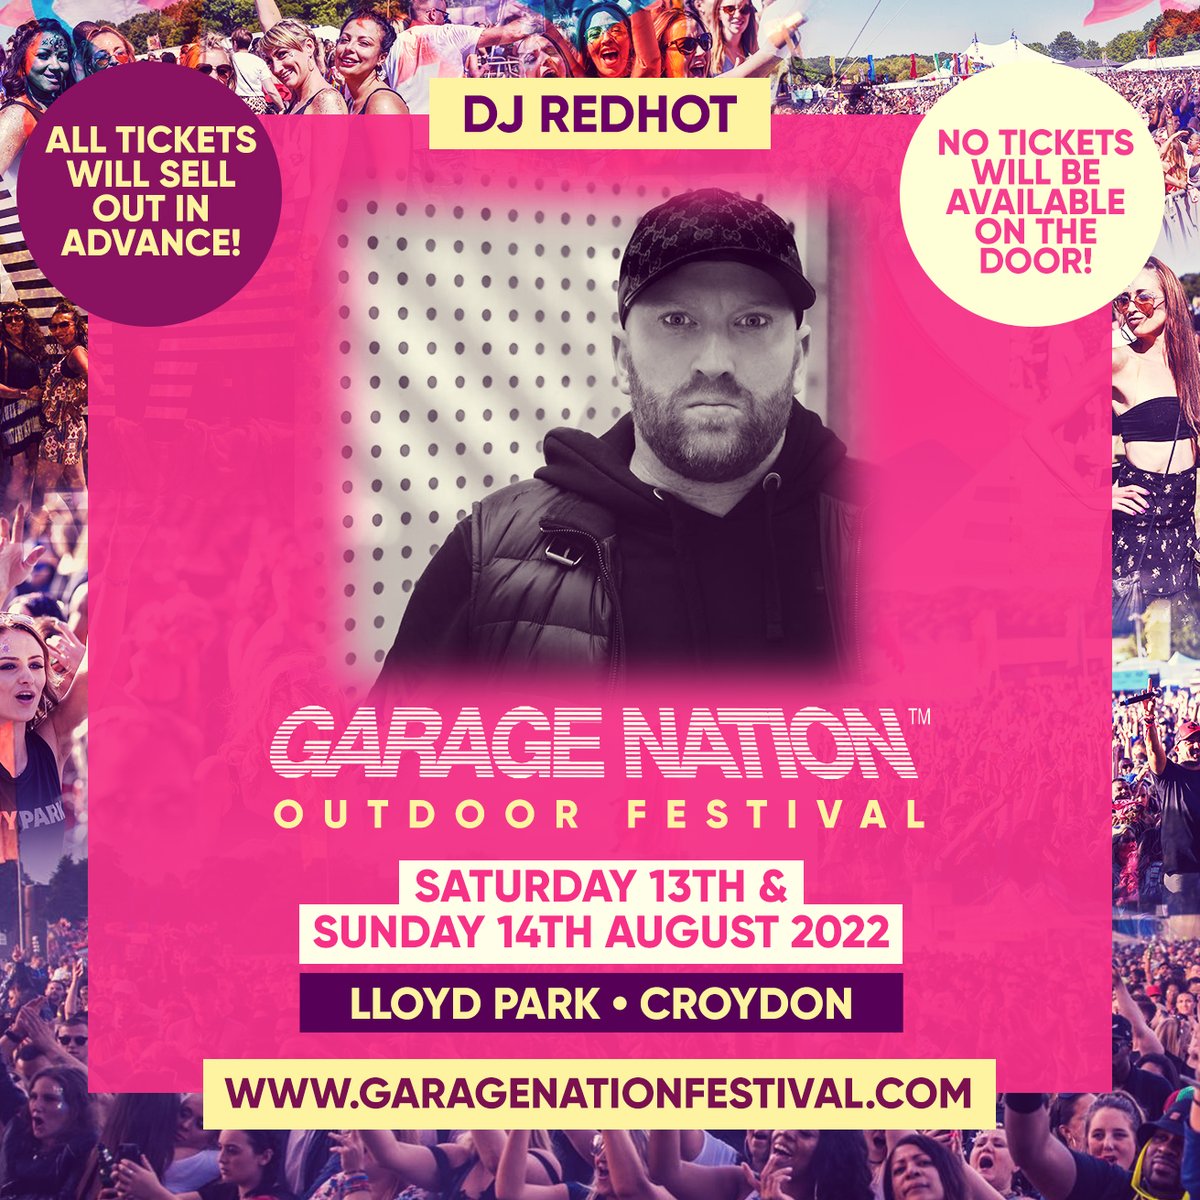 Garage Nation Festival on Sat 13th & Sun 14th August with @djredhot Tickets selling fast - none will be available on the door! >> garagenationfestival.com